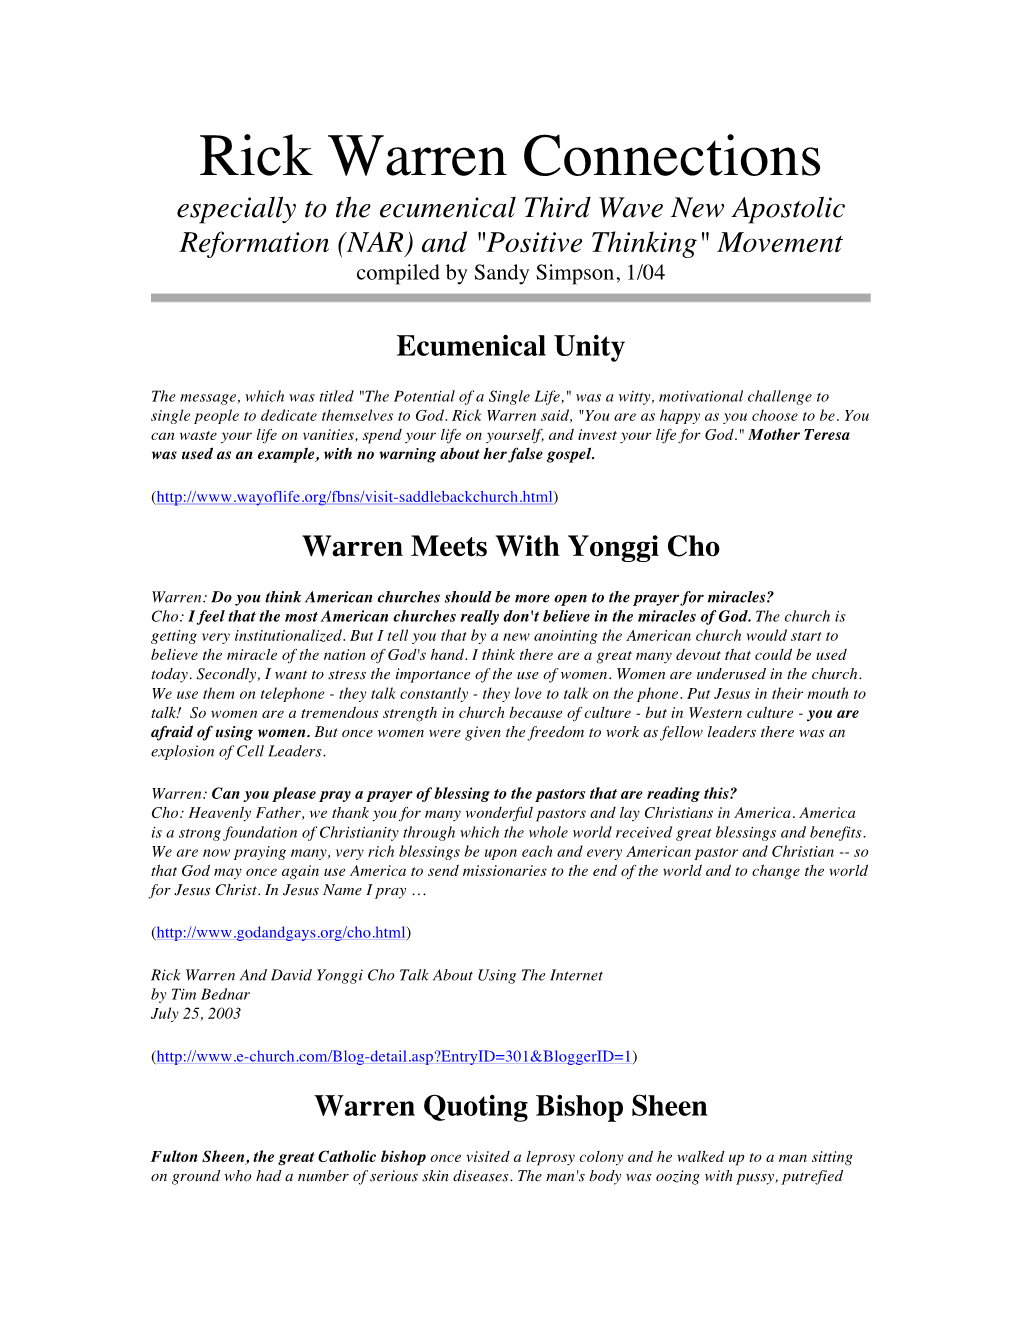 Rick Warren Connections Especially to the Ecumenical Third Wave New Apostolic Reformation (NAR) and "Positive Thinking" Movement Compiled by Sandy Simpson, 1/04